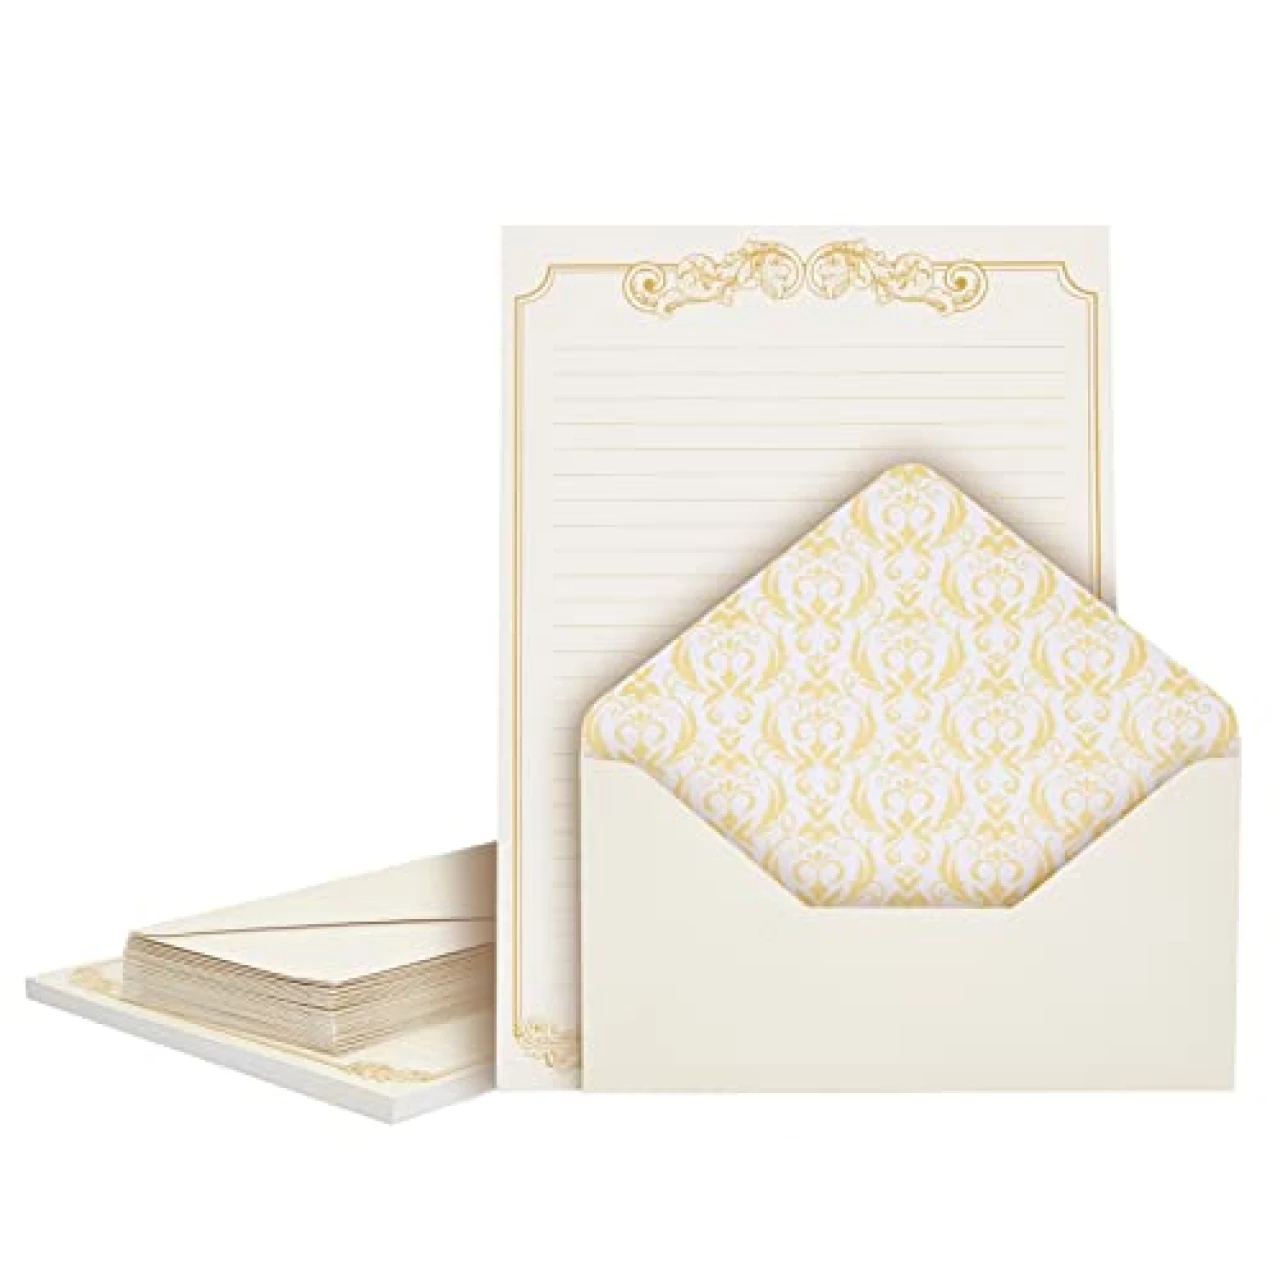 90 Pieces Stationery Set (60 Vintage-Style Paper Sheets + 30 Envelopes)